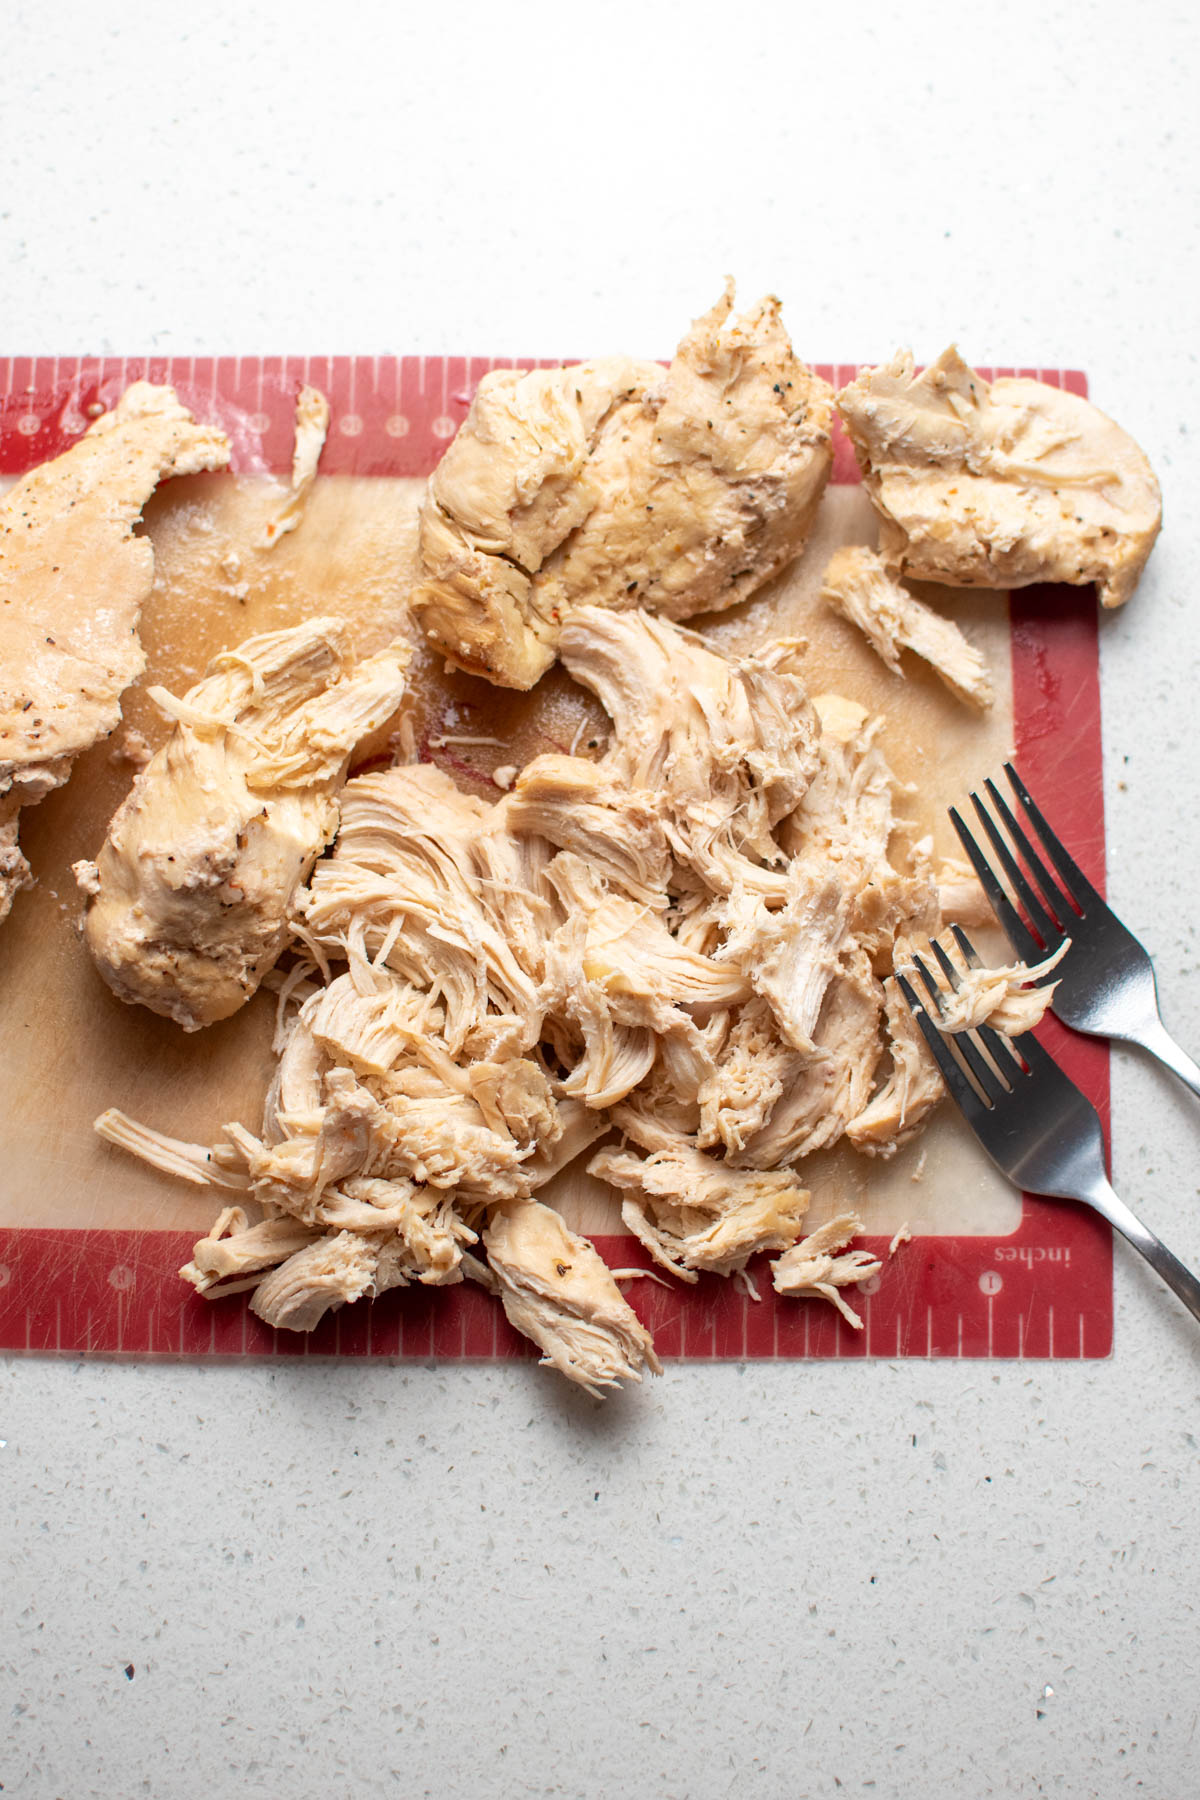 Shredded chicken on cutting board with two metal forks nearby.